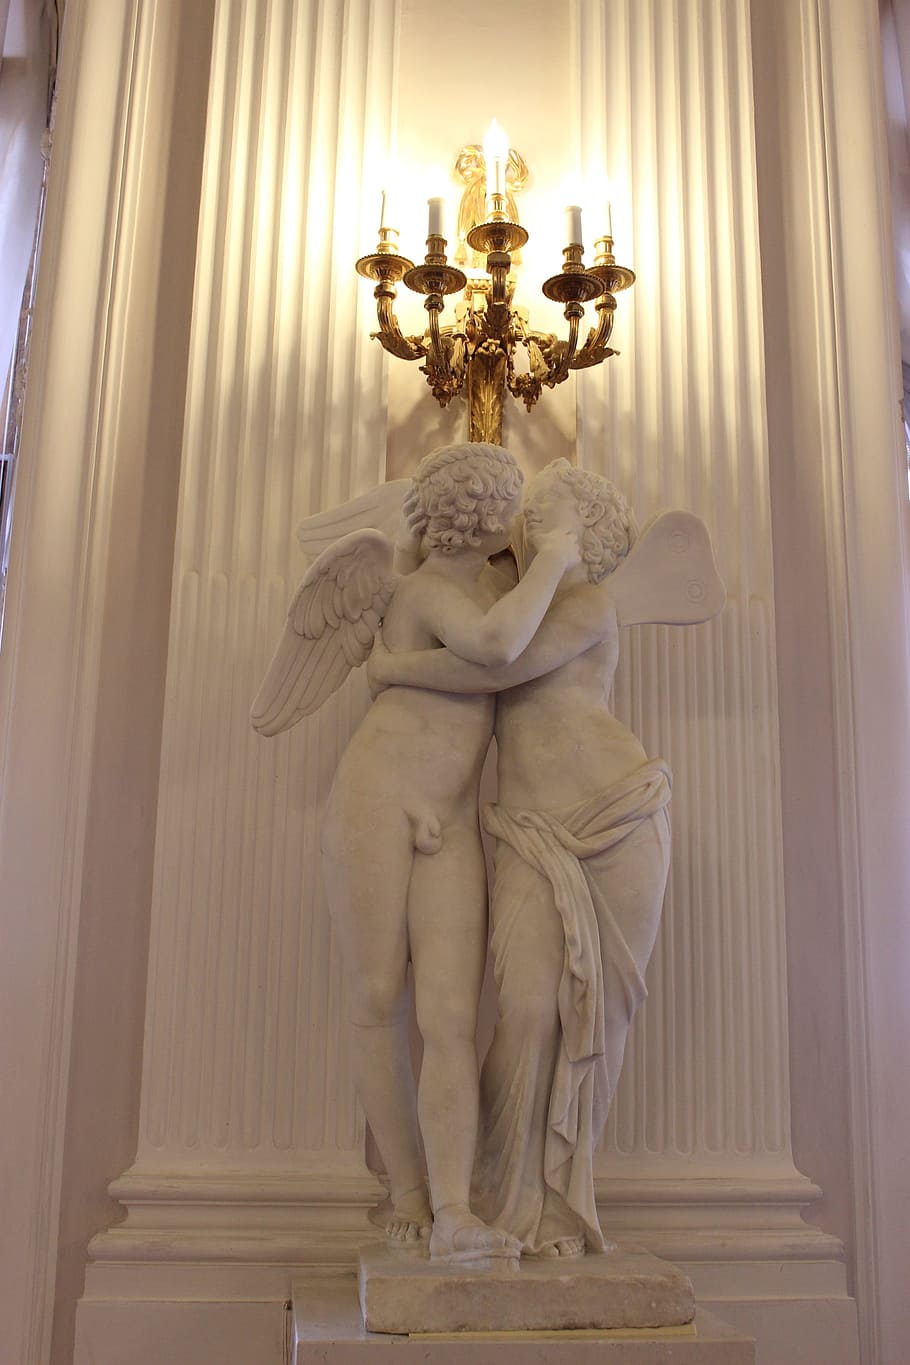 St Petersburg Russia, Gatchina, russia, palace, sculpture, statue, cupid, kiss, angel, historical